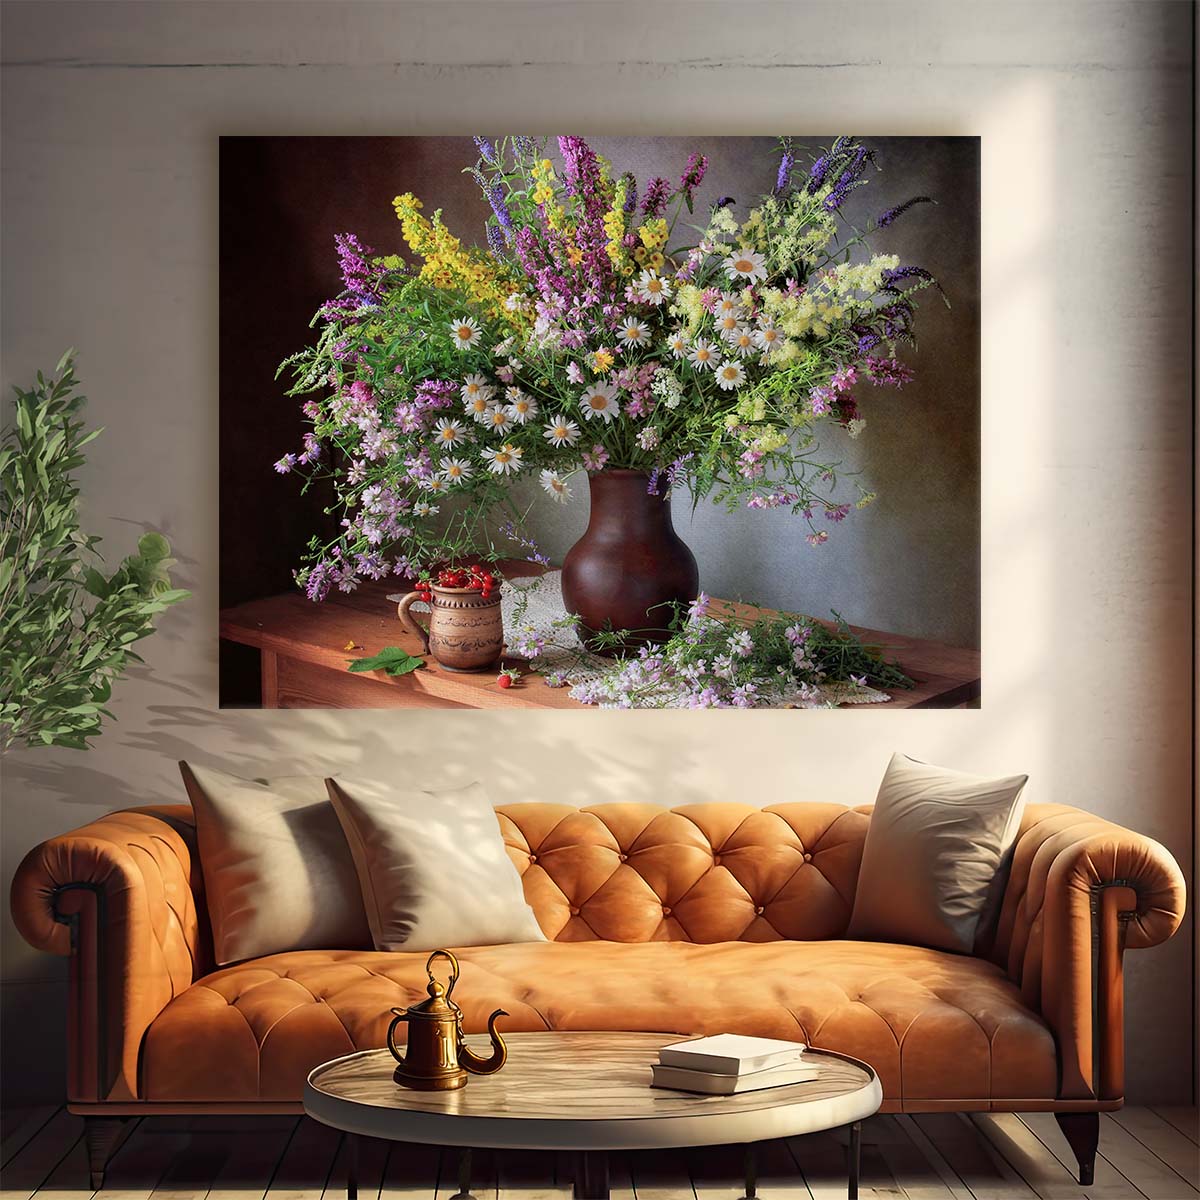 Summer Blossom & Berry Vase Floral Wall Art by Luxuriance Designs. Made in USA.